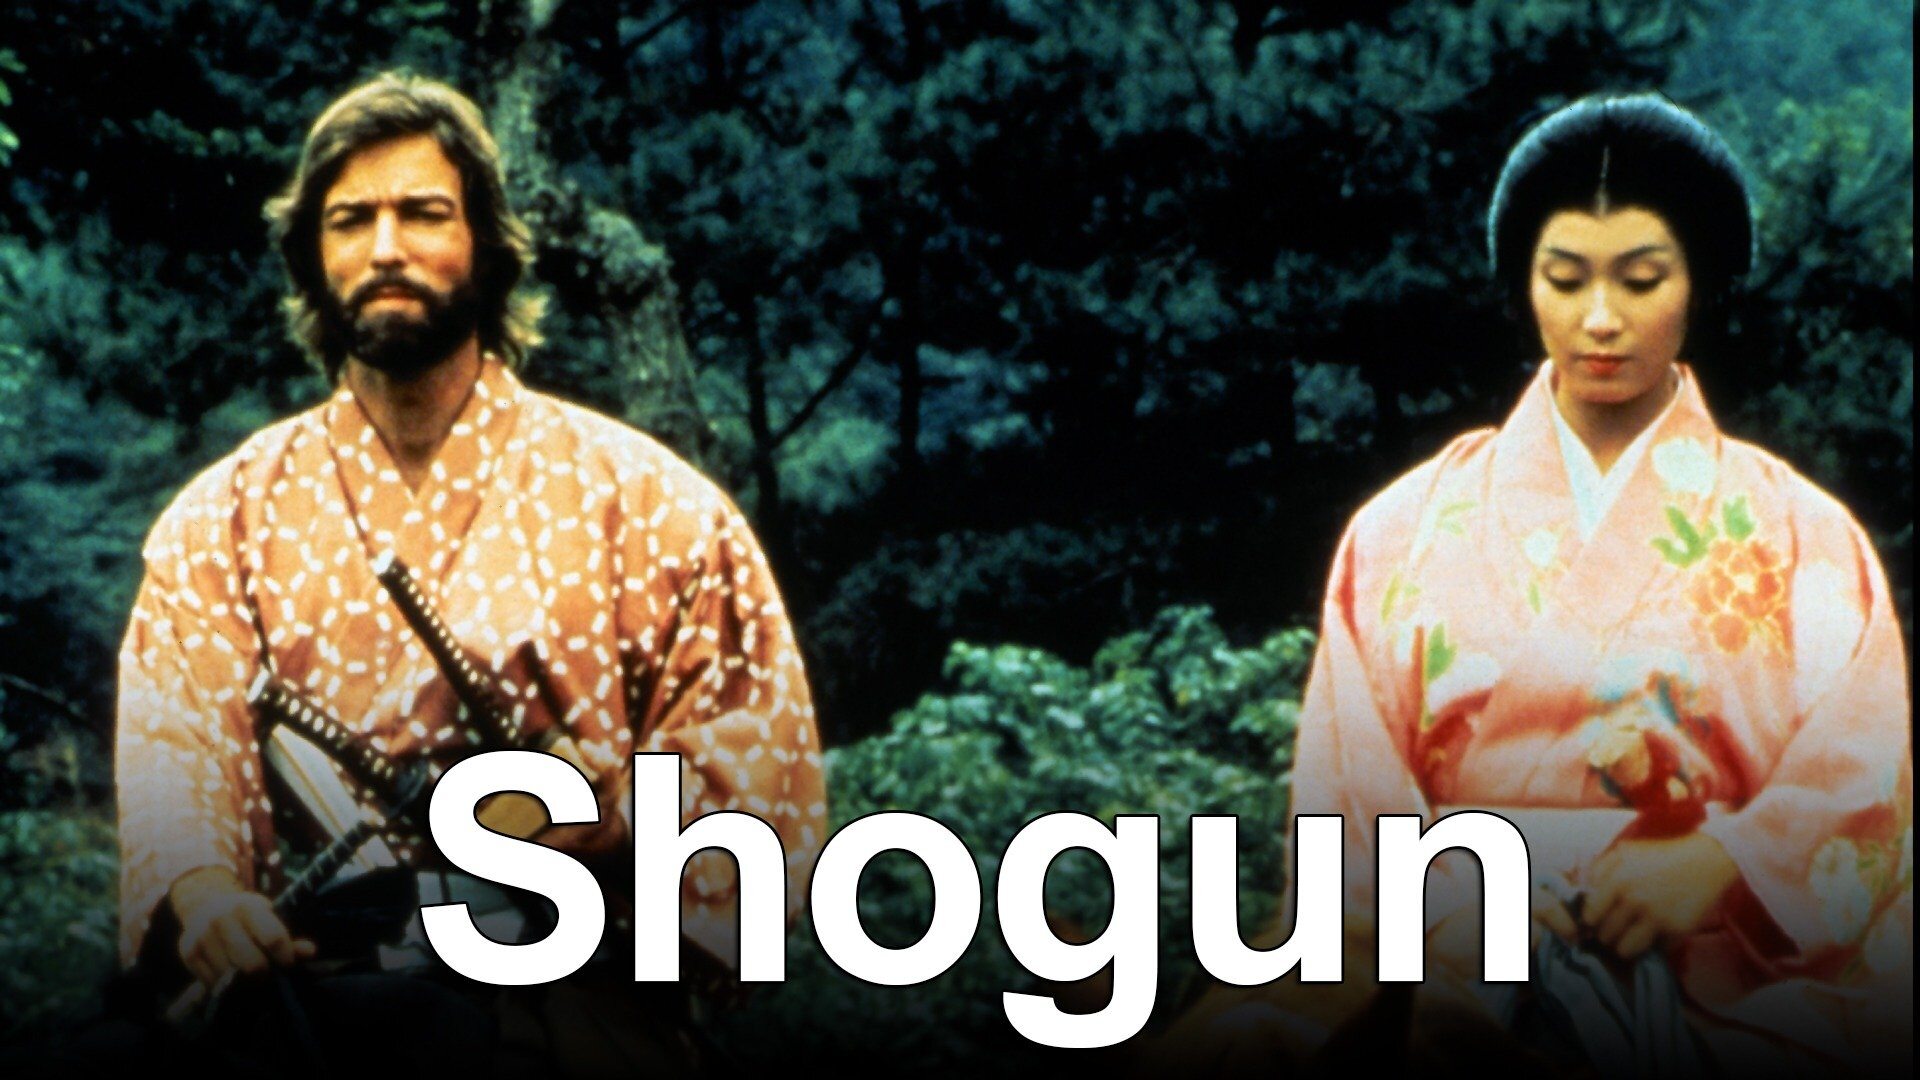 43-facts-about-the-movie-shogun